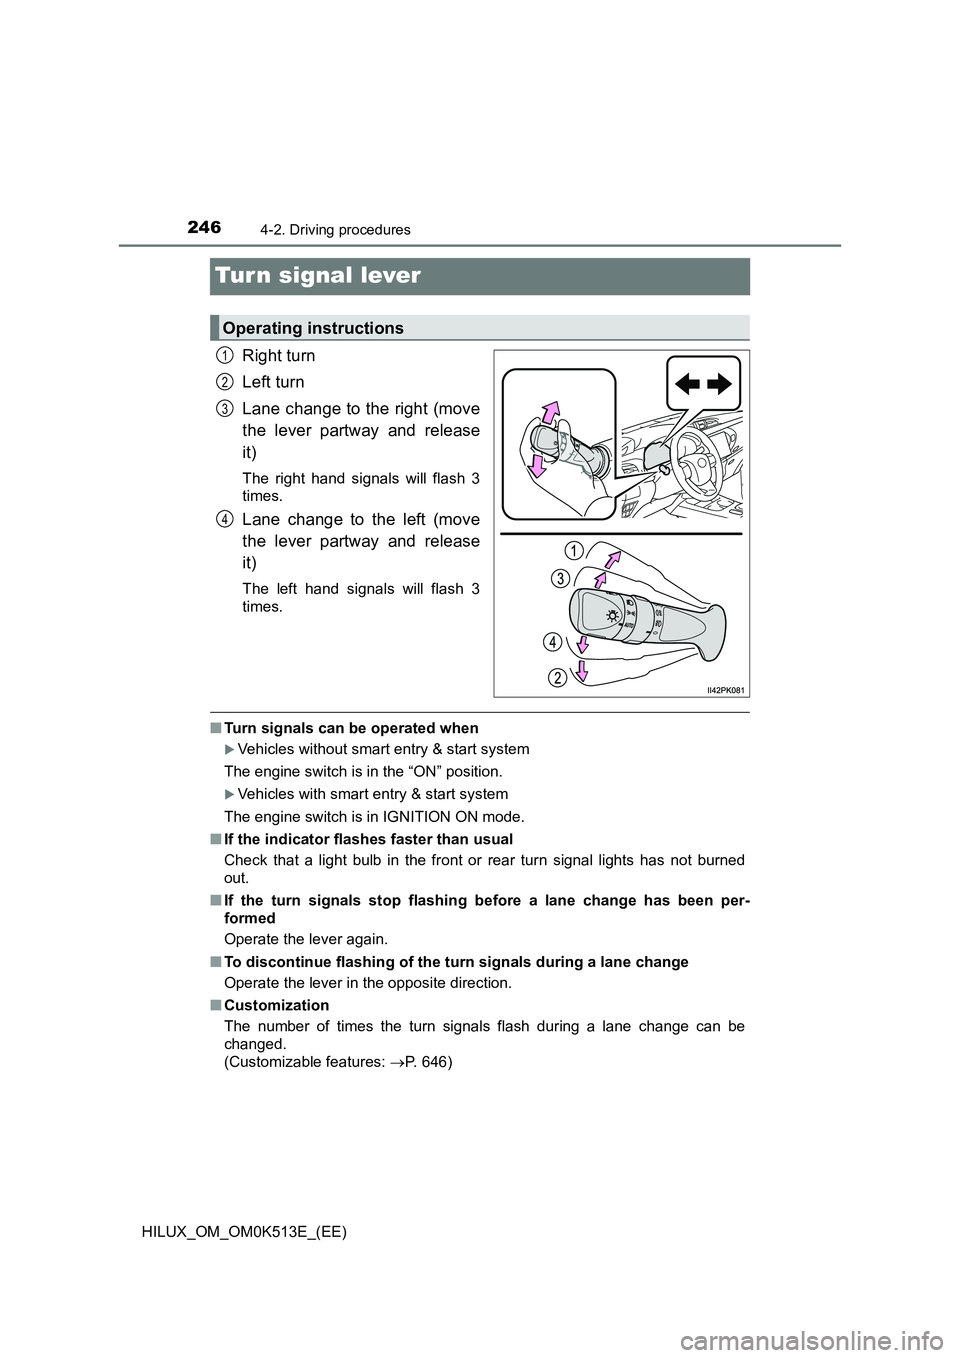 TOYOTA HILUX 2021  Owners Manual (in English) 2464-2. Driving procedures
HILUX_OM_OM0K513E_(EE)
Turn signal lever
Right turn 
Left turn 
Lane change to the right (move 
the lever partway and release 
it)
The right hand signals will flash 3 
times